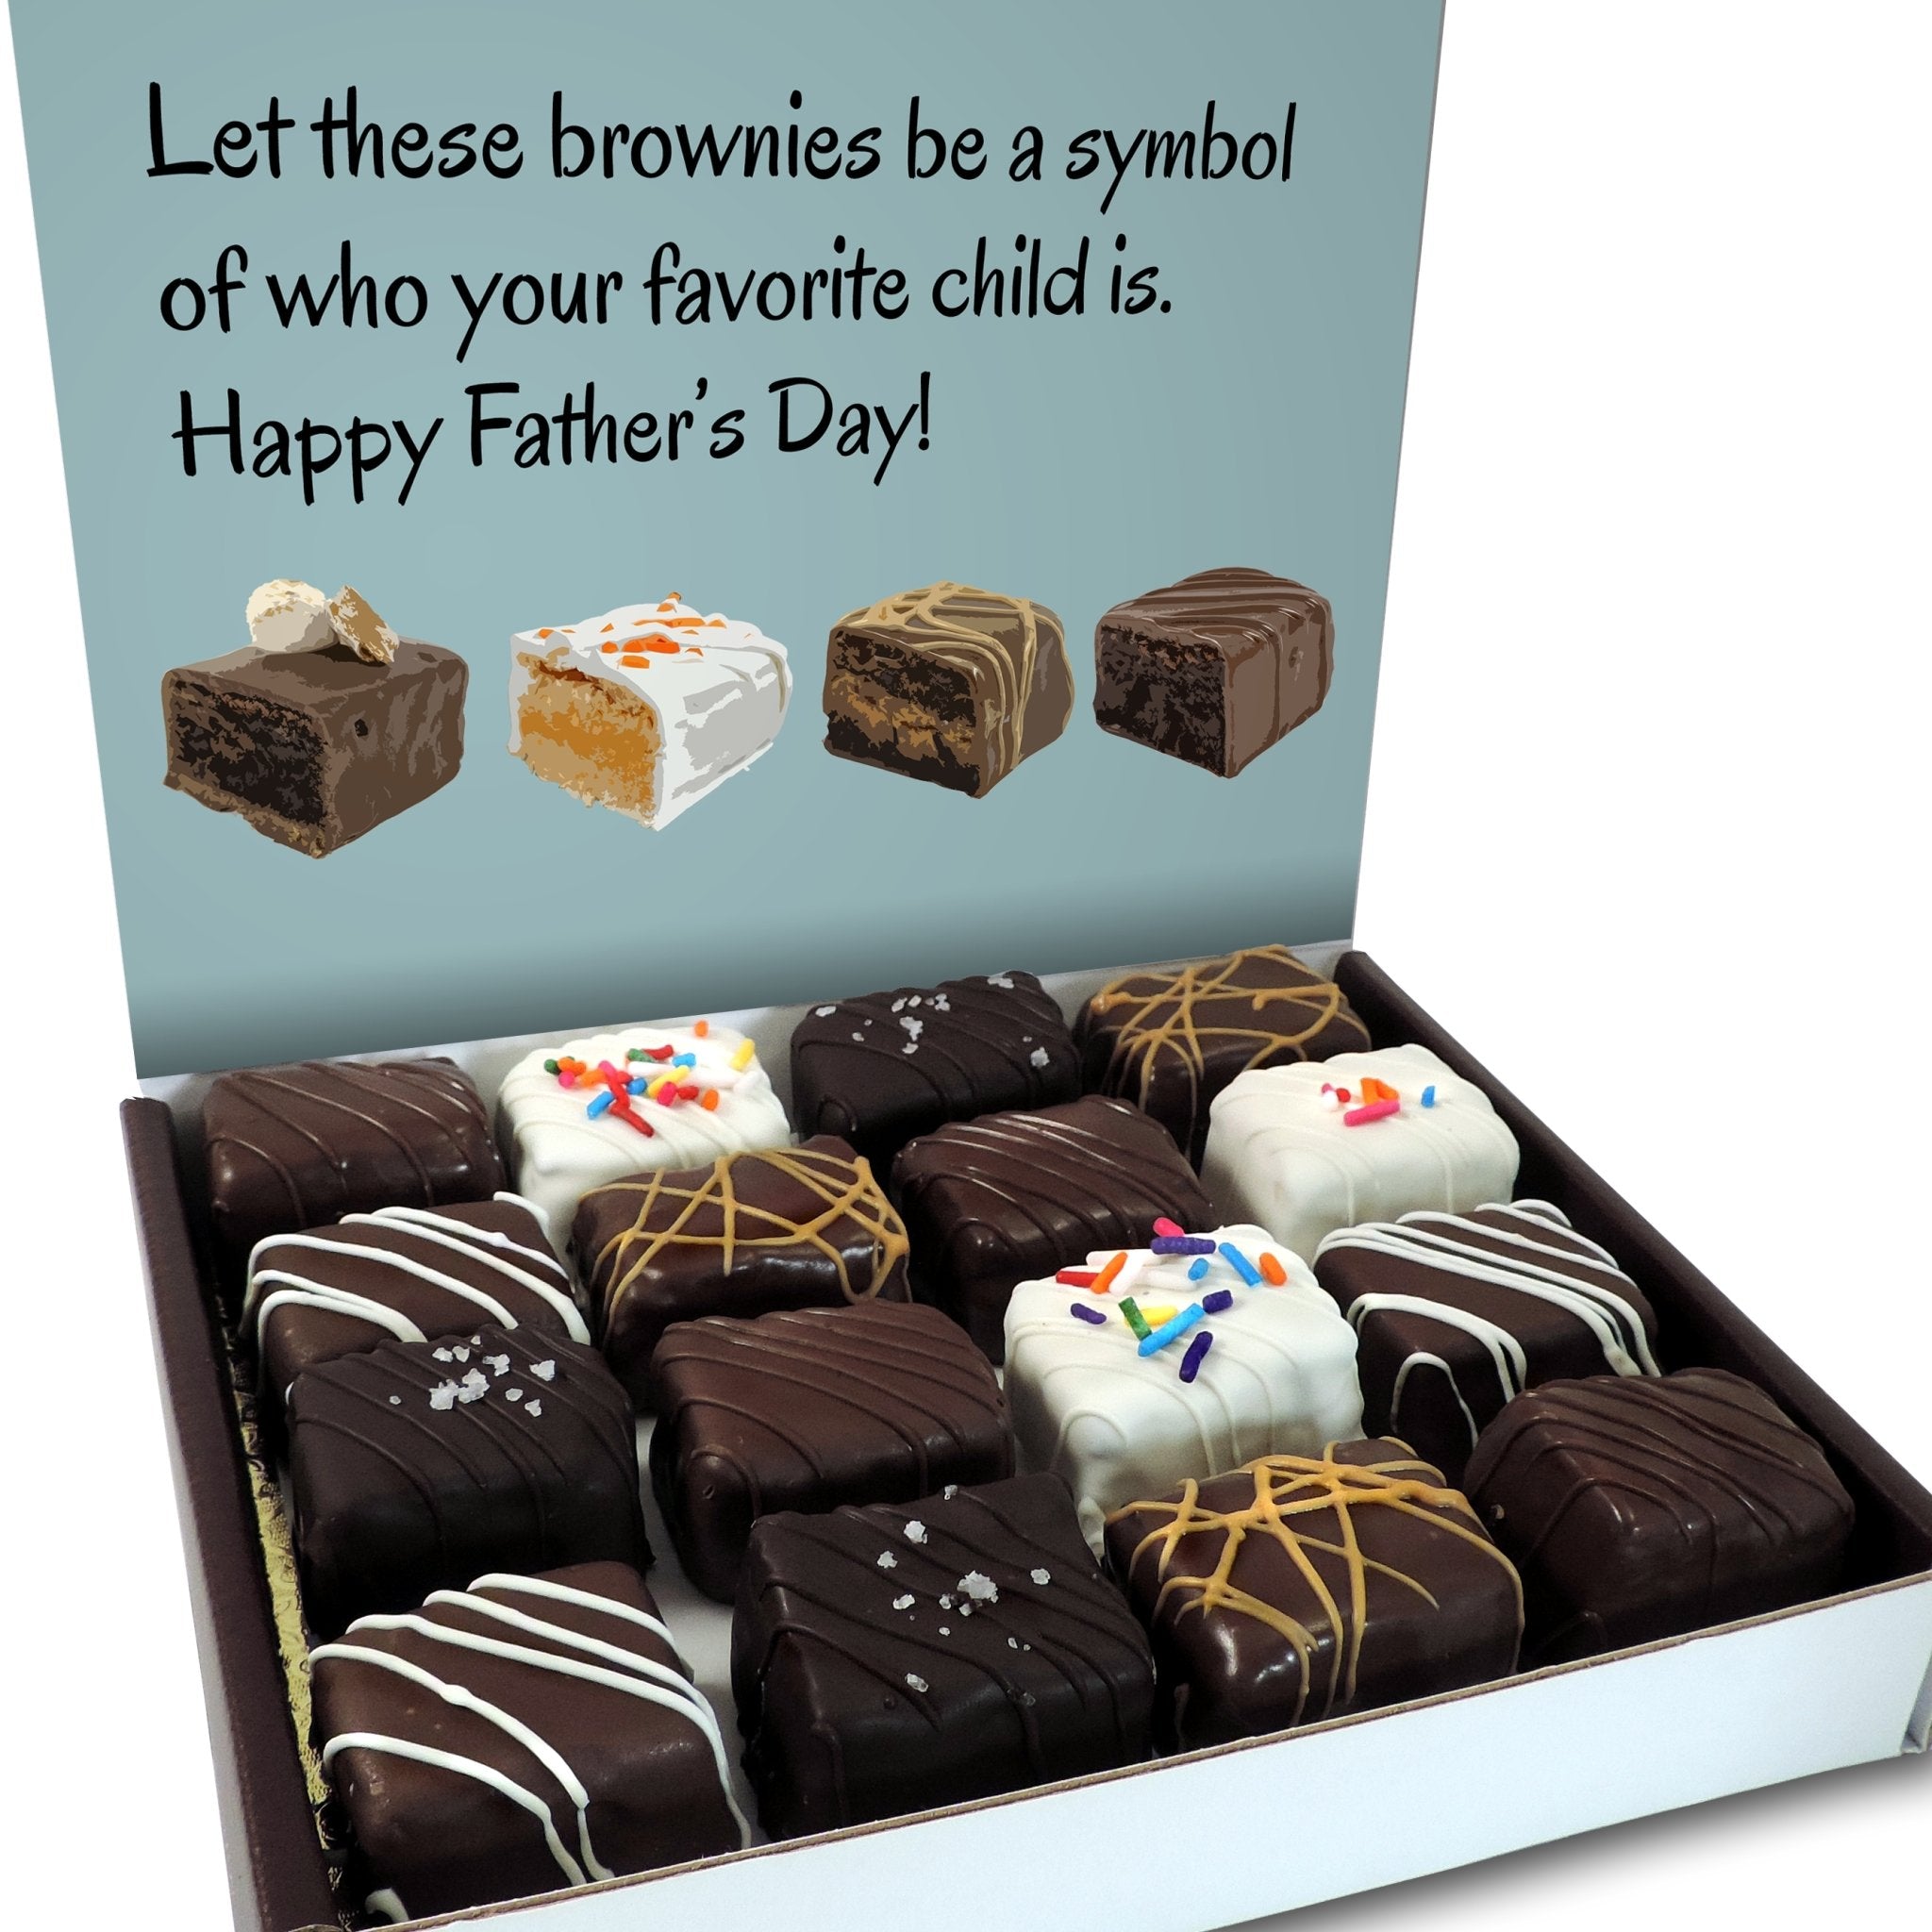 From Your Favorite Child - 16 - Nettie's Craft Brownies